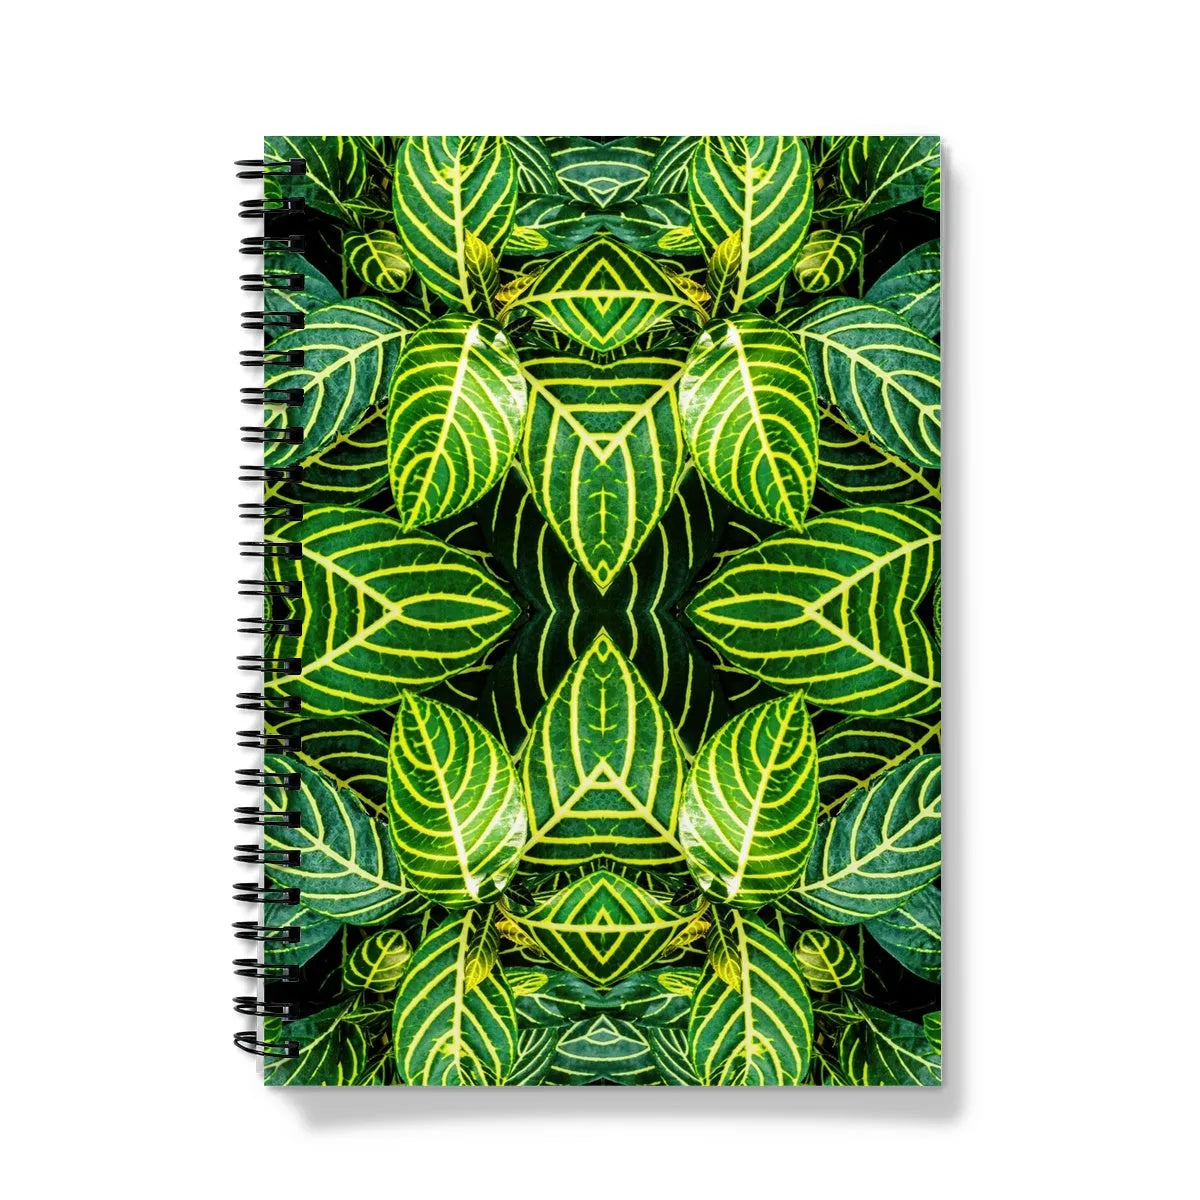 Just The Headlines Notebook - A5 - Graph Paper - Notebooks & Notepads - Aesthetic Art